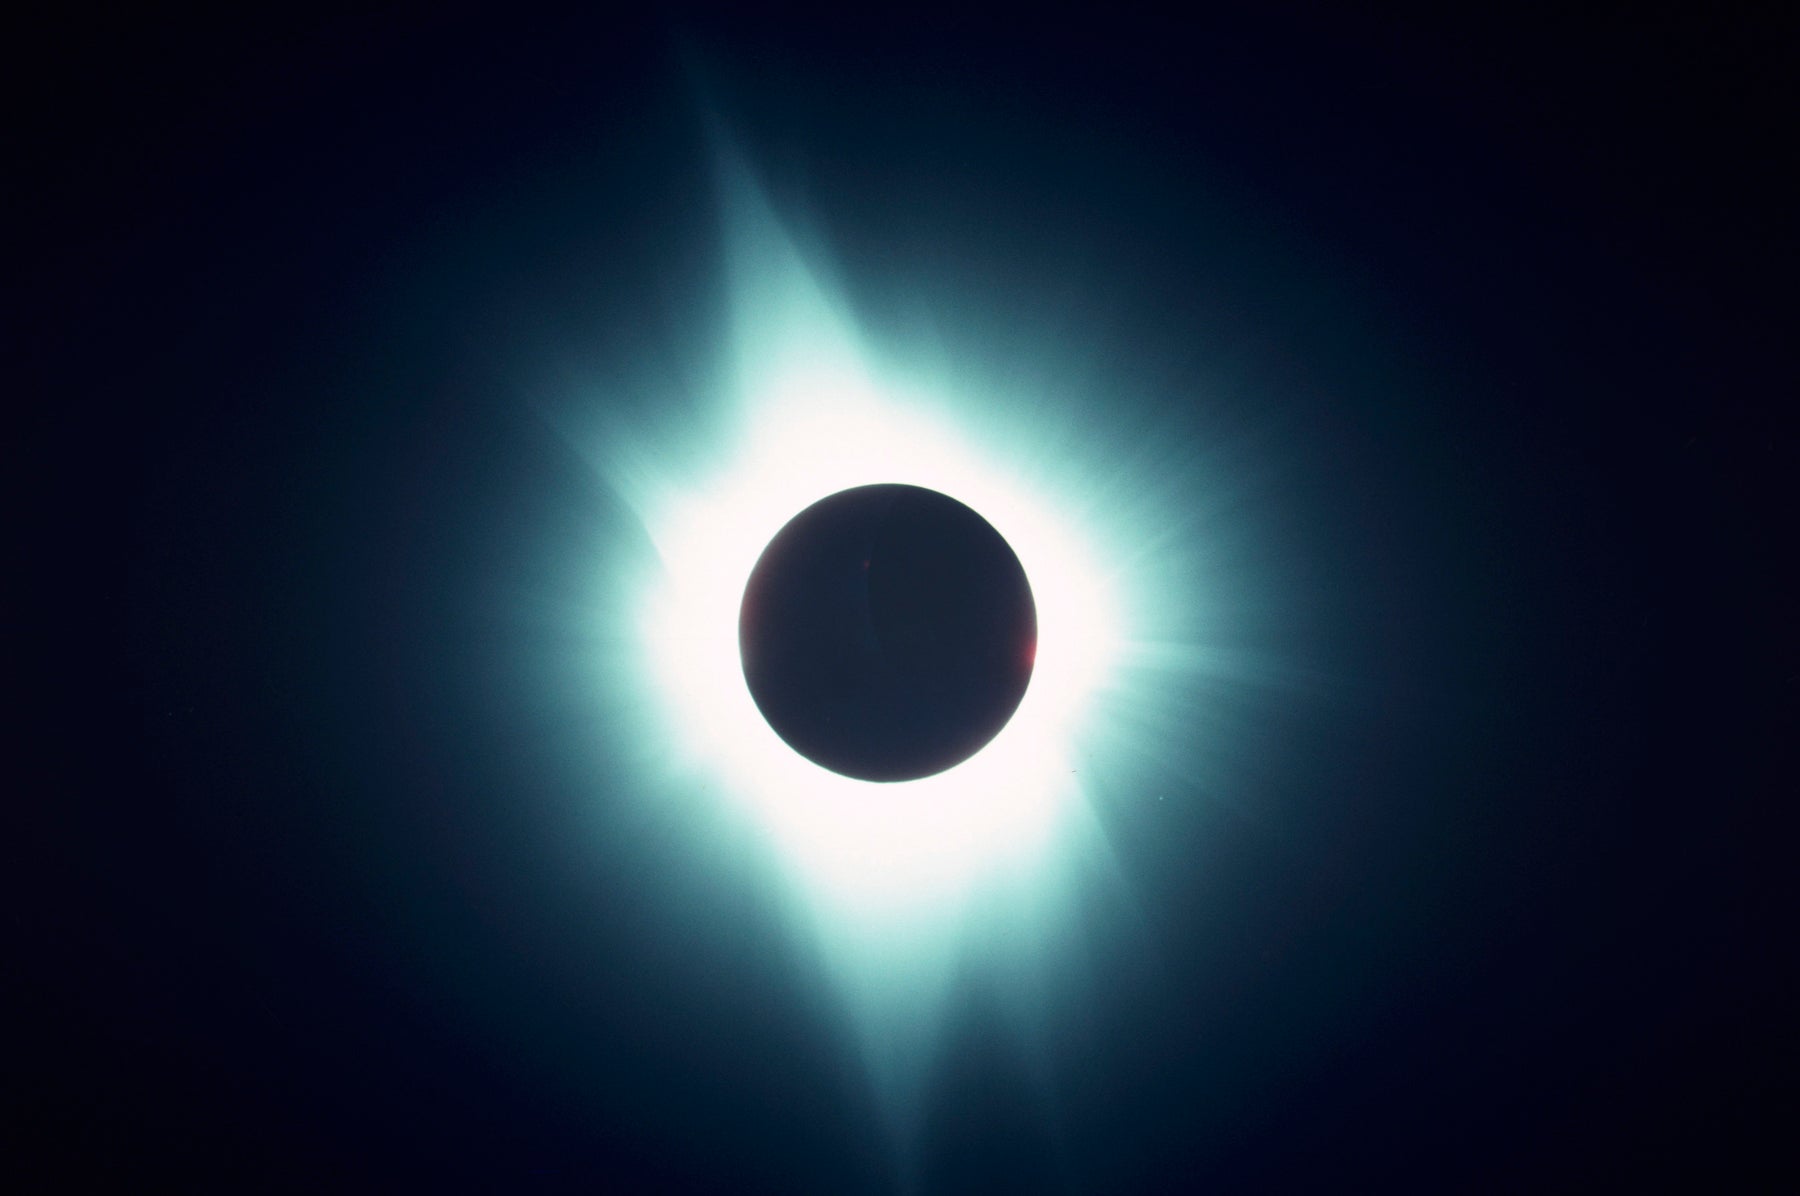 Tips on Photographing the Solar Eclipse